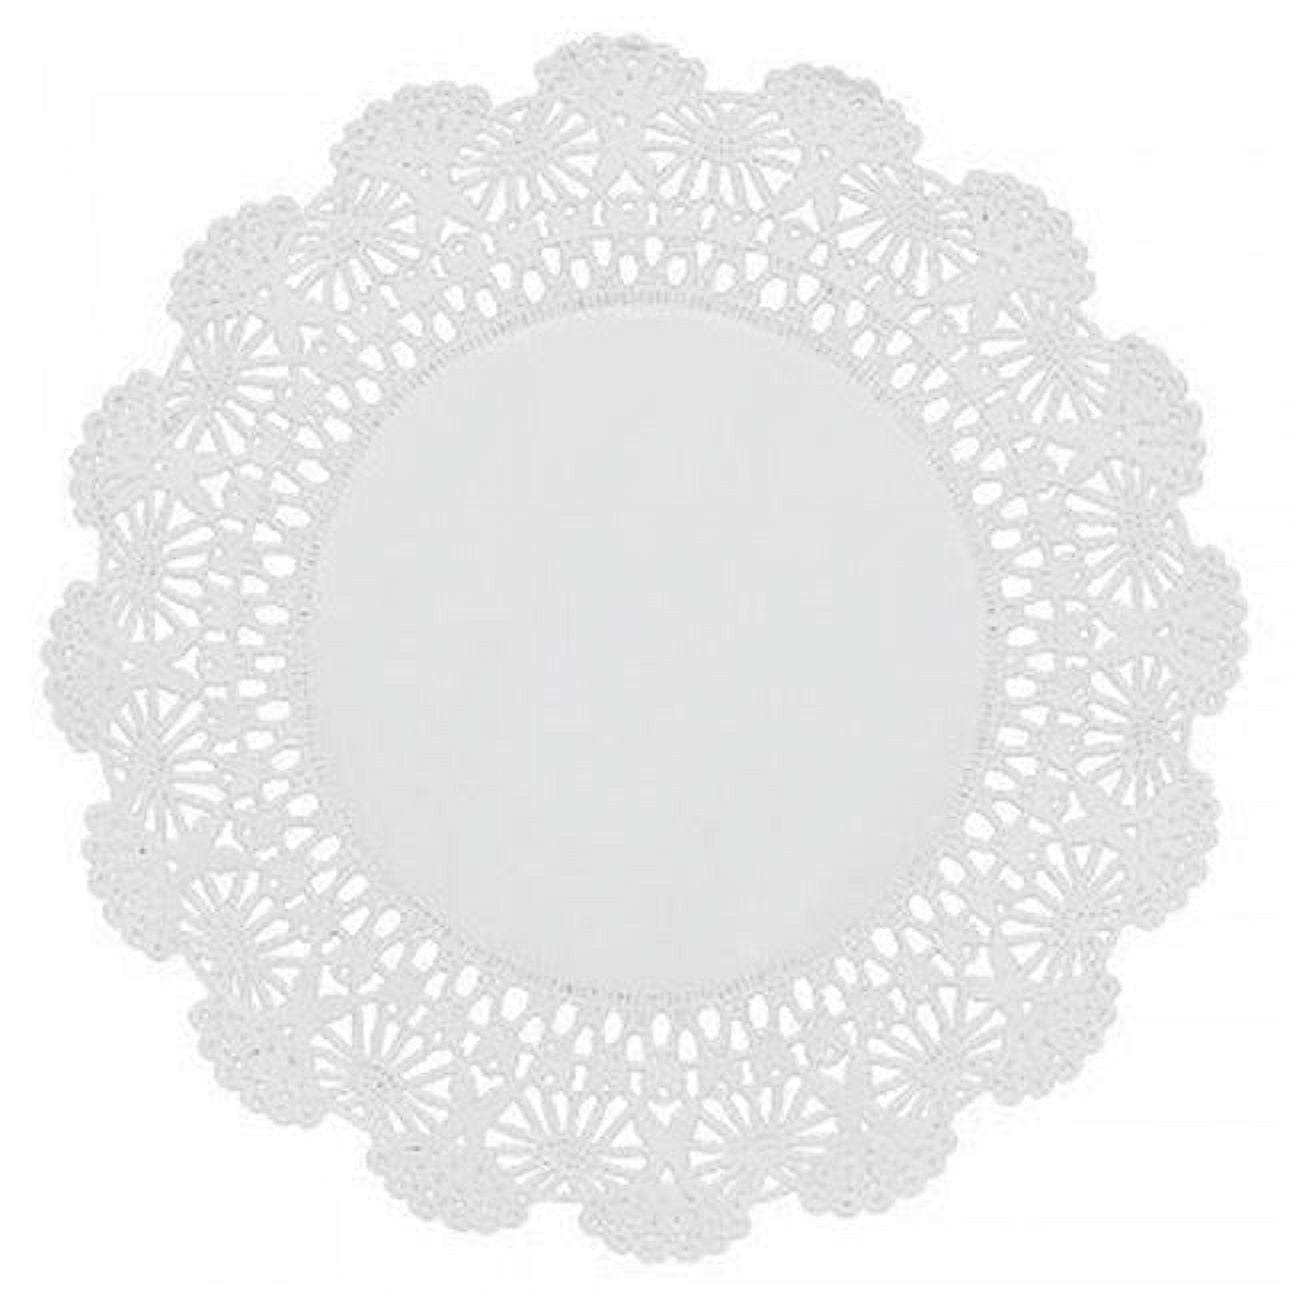 Picture of Hoffmaster 500235 CPC 6 in. Cambridge Lace Paper Doilies, White - Case of 1000